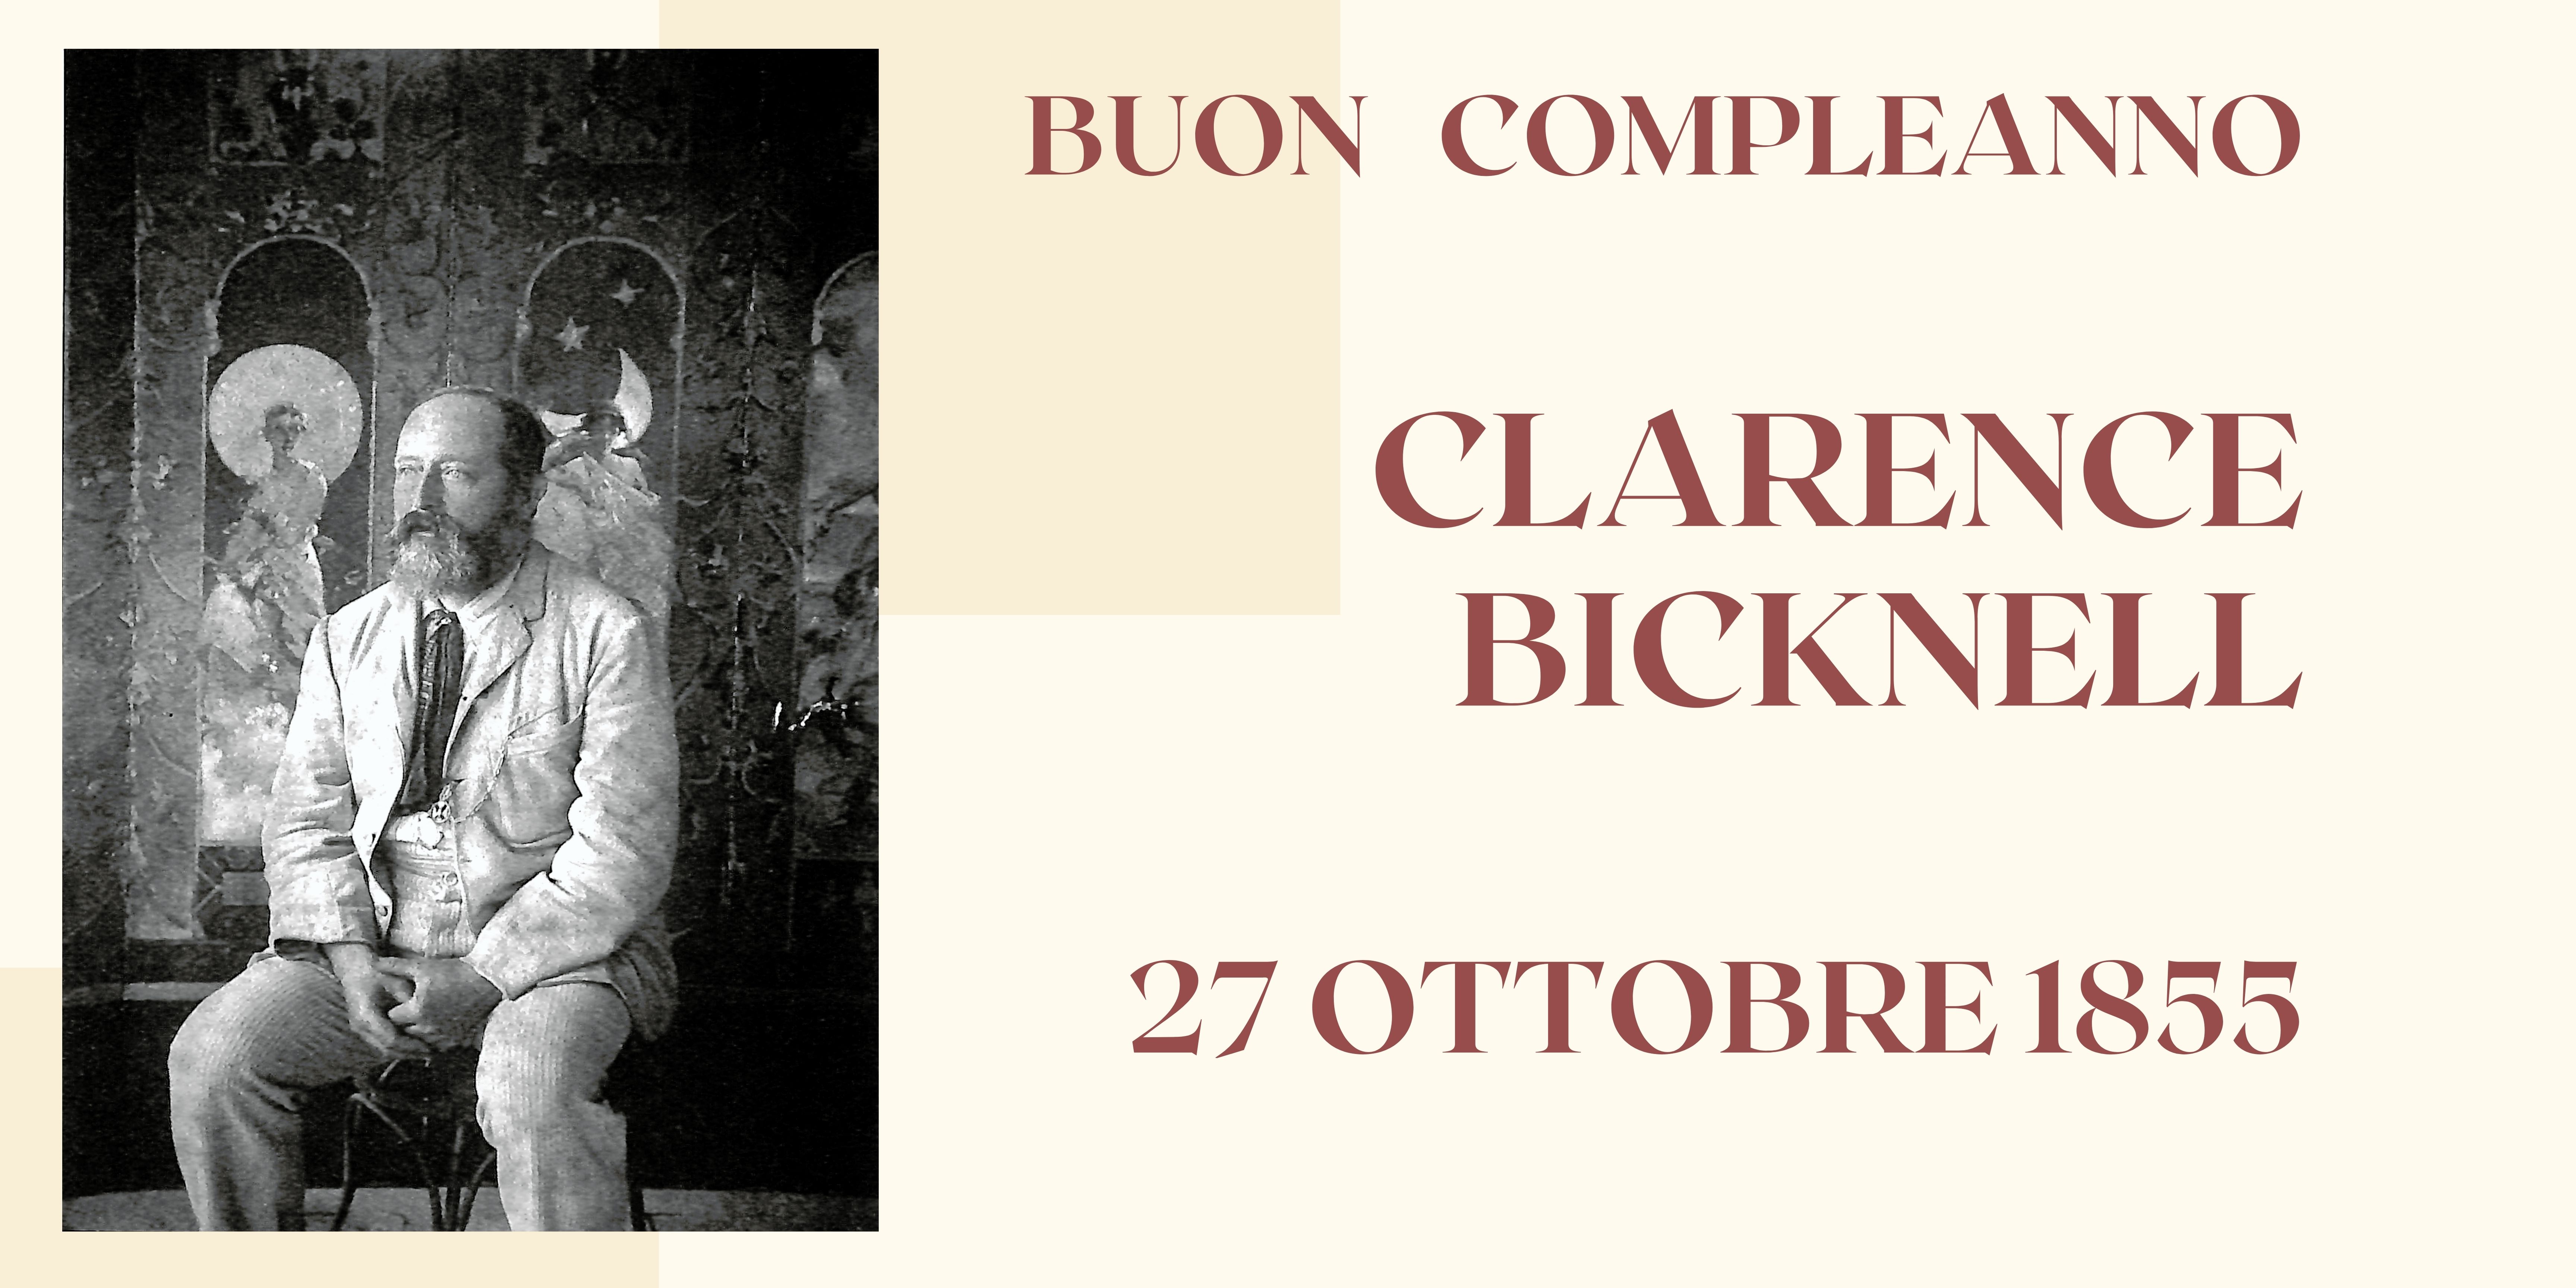 CLarence BIcknell